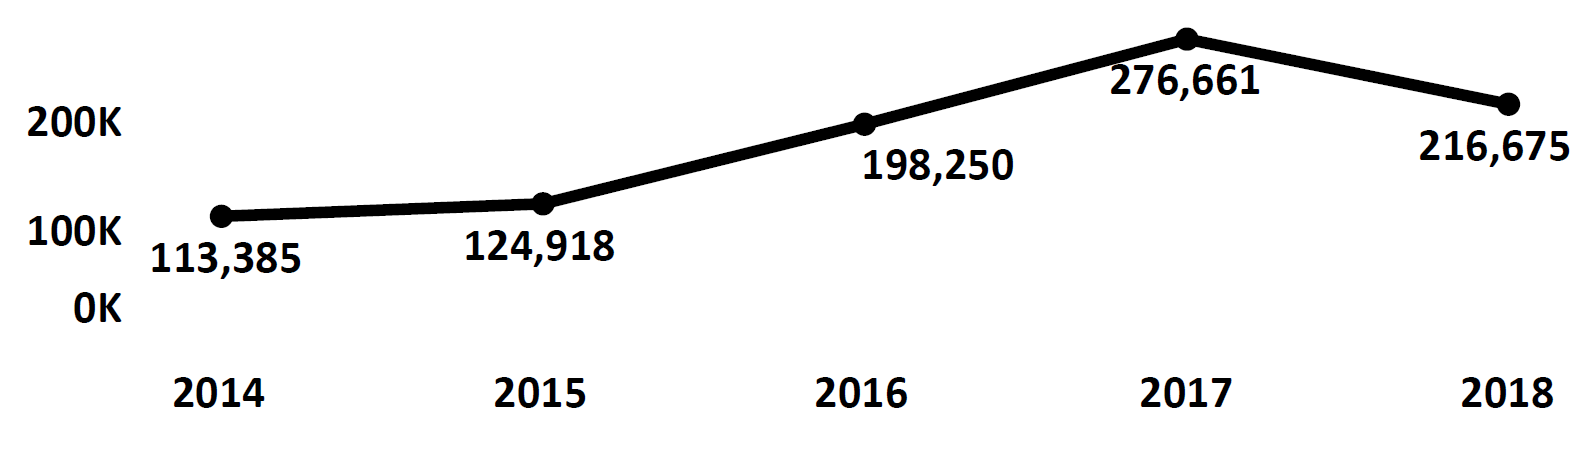 Graph of Do Not Call complaints recorded in Ohio from fiscal year 2014 to fiscal year 2018. In 2014 there were 113,385 complaints filed, which increased each year peaking at 276,661 in 2017. In 2018 there were 216,675 complaints filed, fewer than 2017.